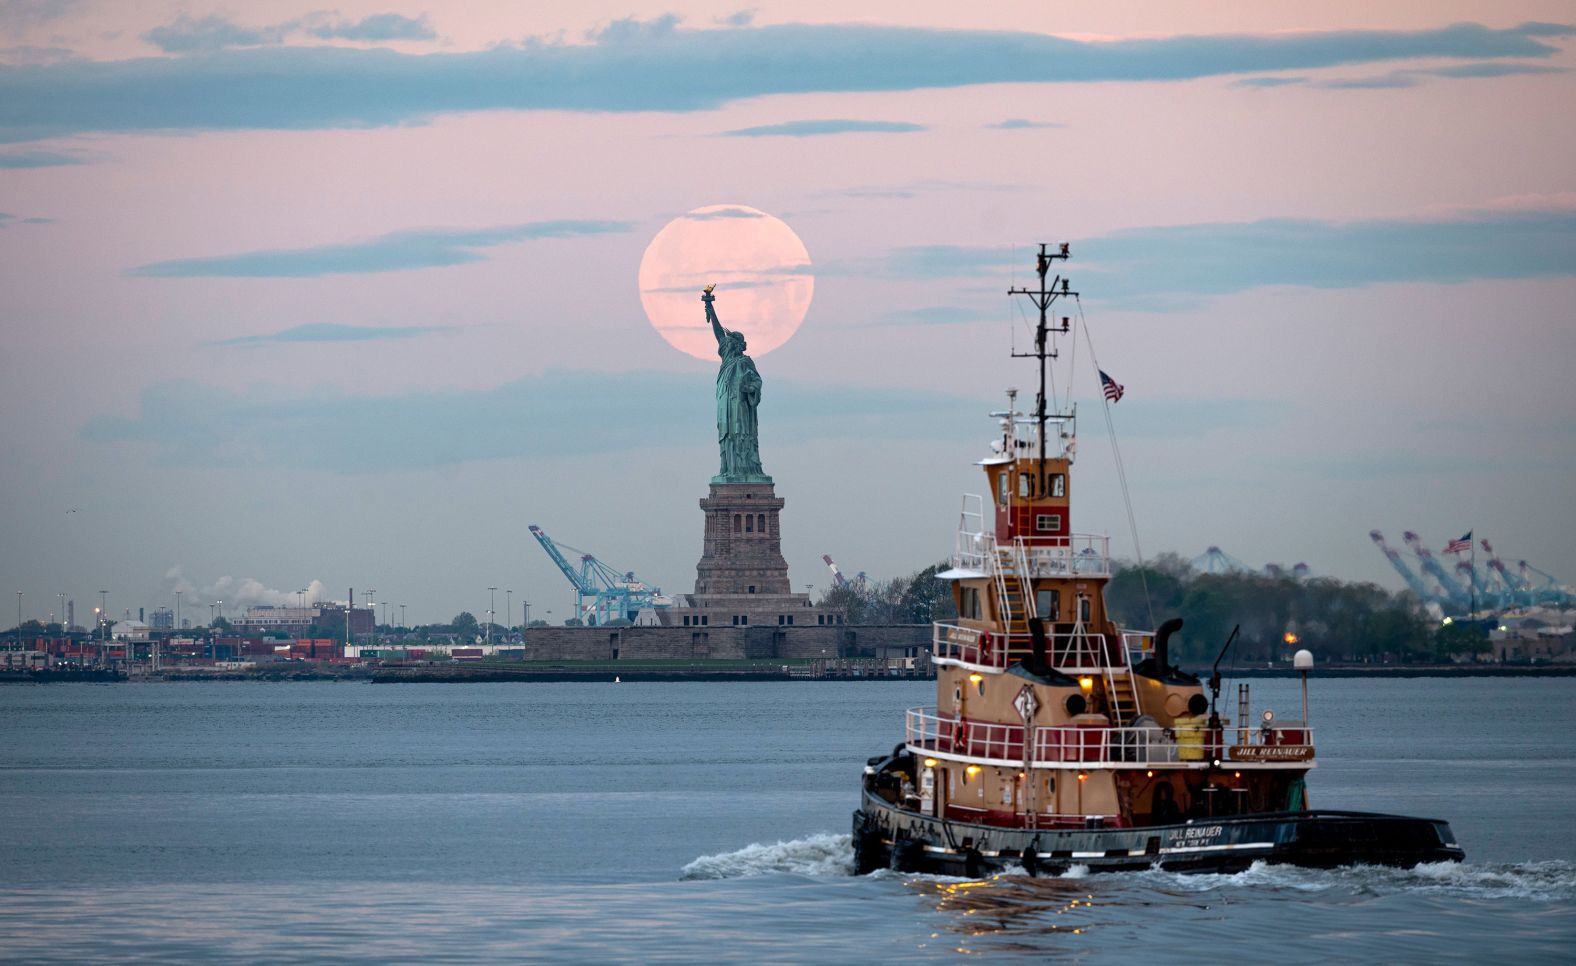 The moon is seen behind the Statue of Liberty in New York.